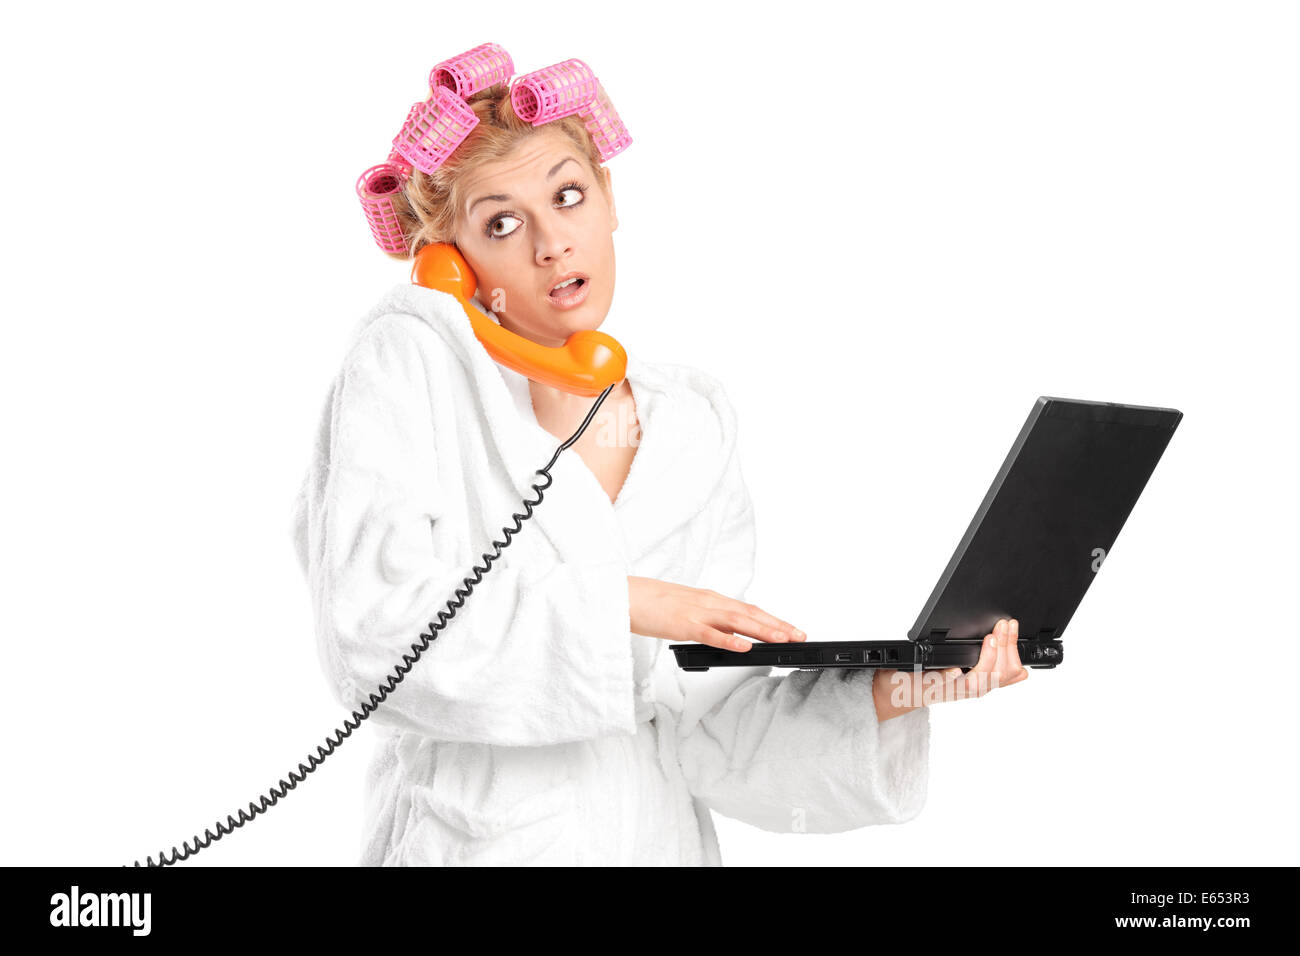 Surprised girl holding laptop and talking on phone isolated on white background Stock Photo